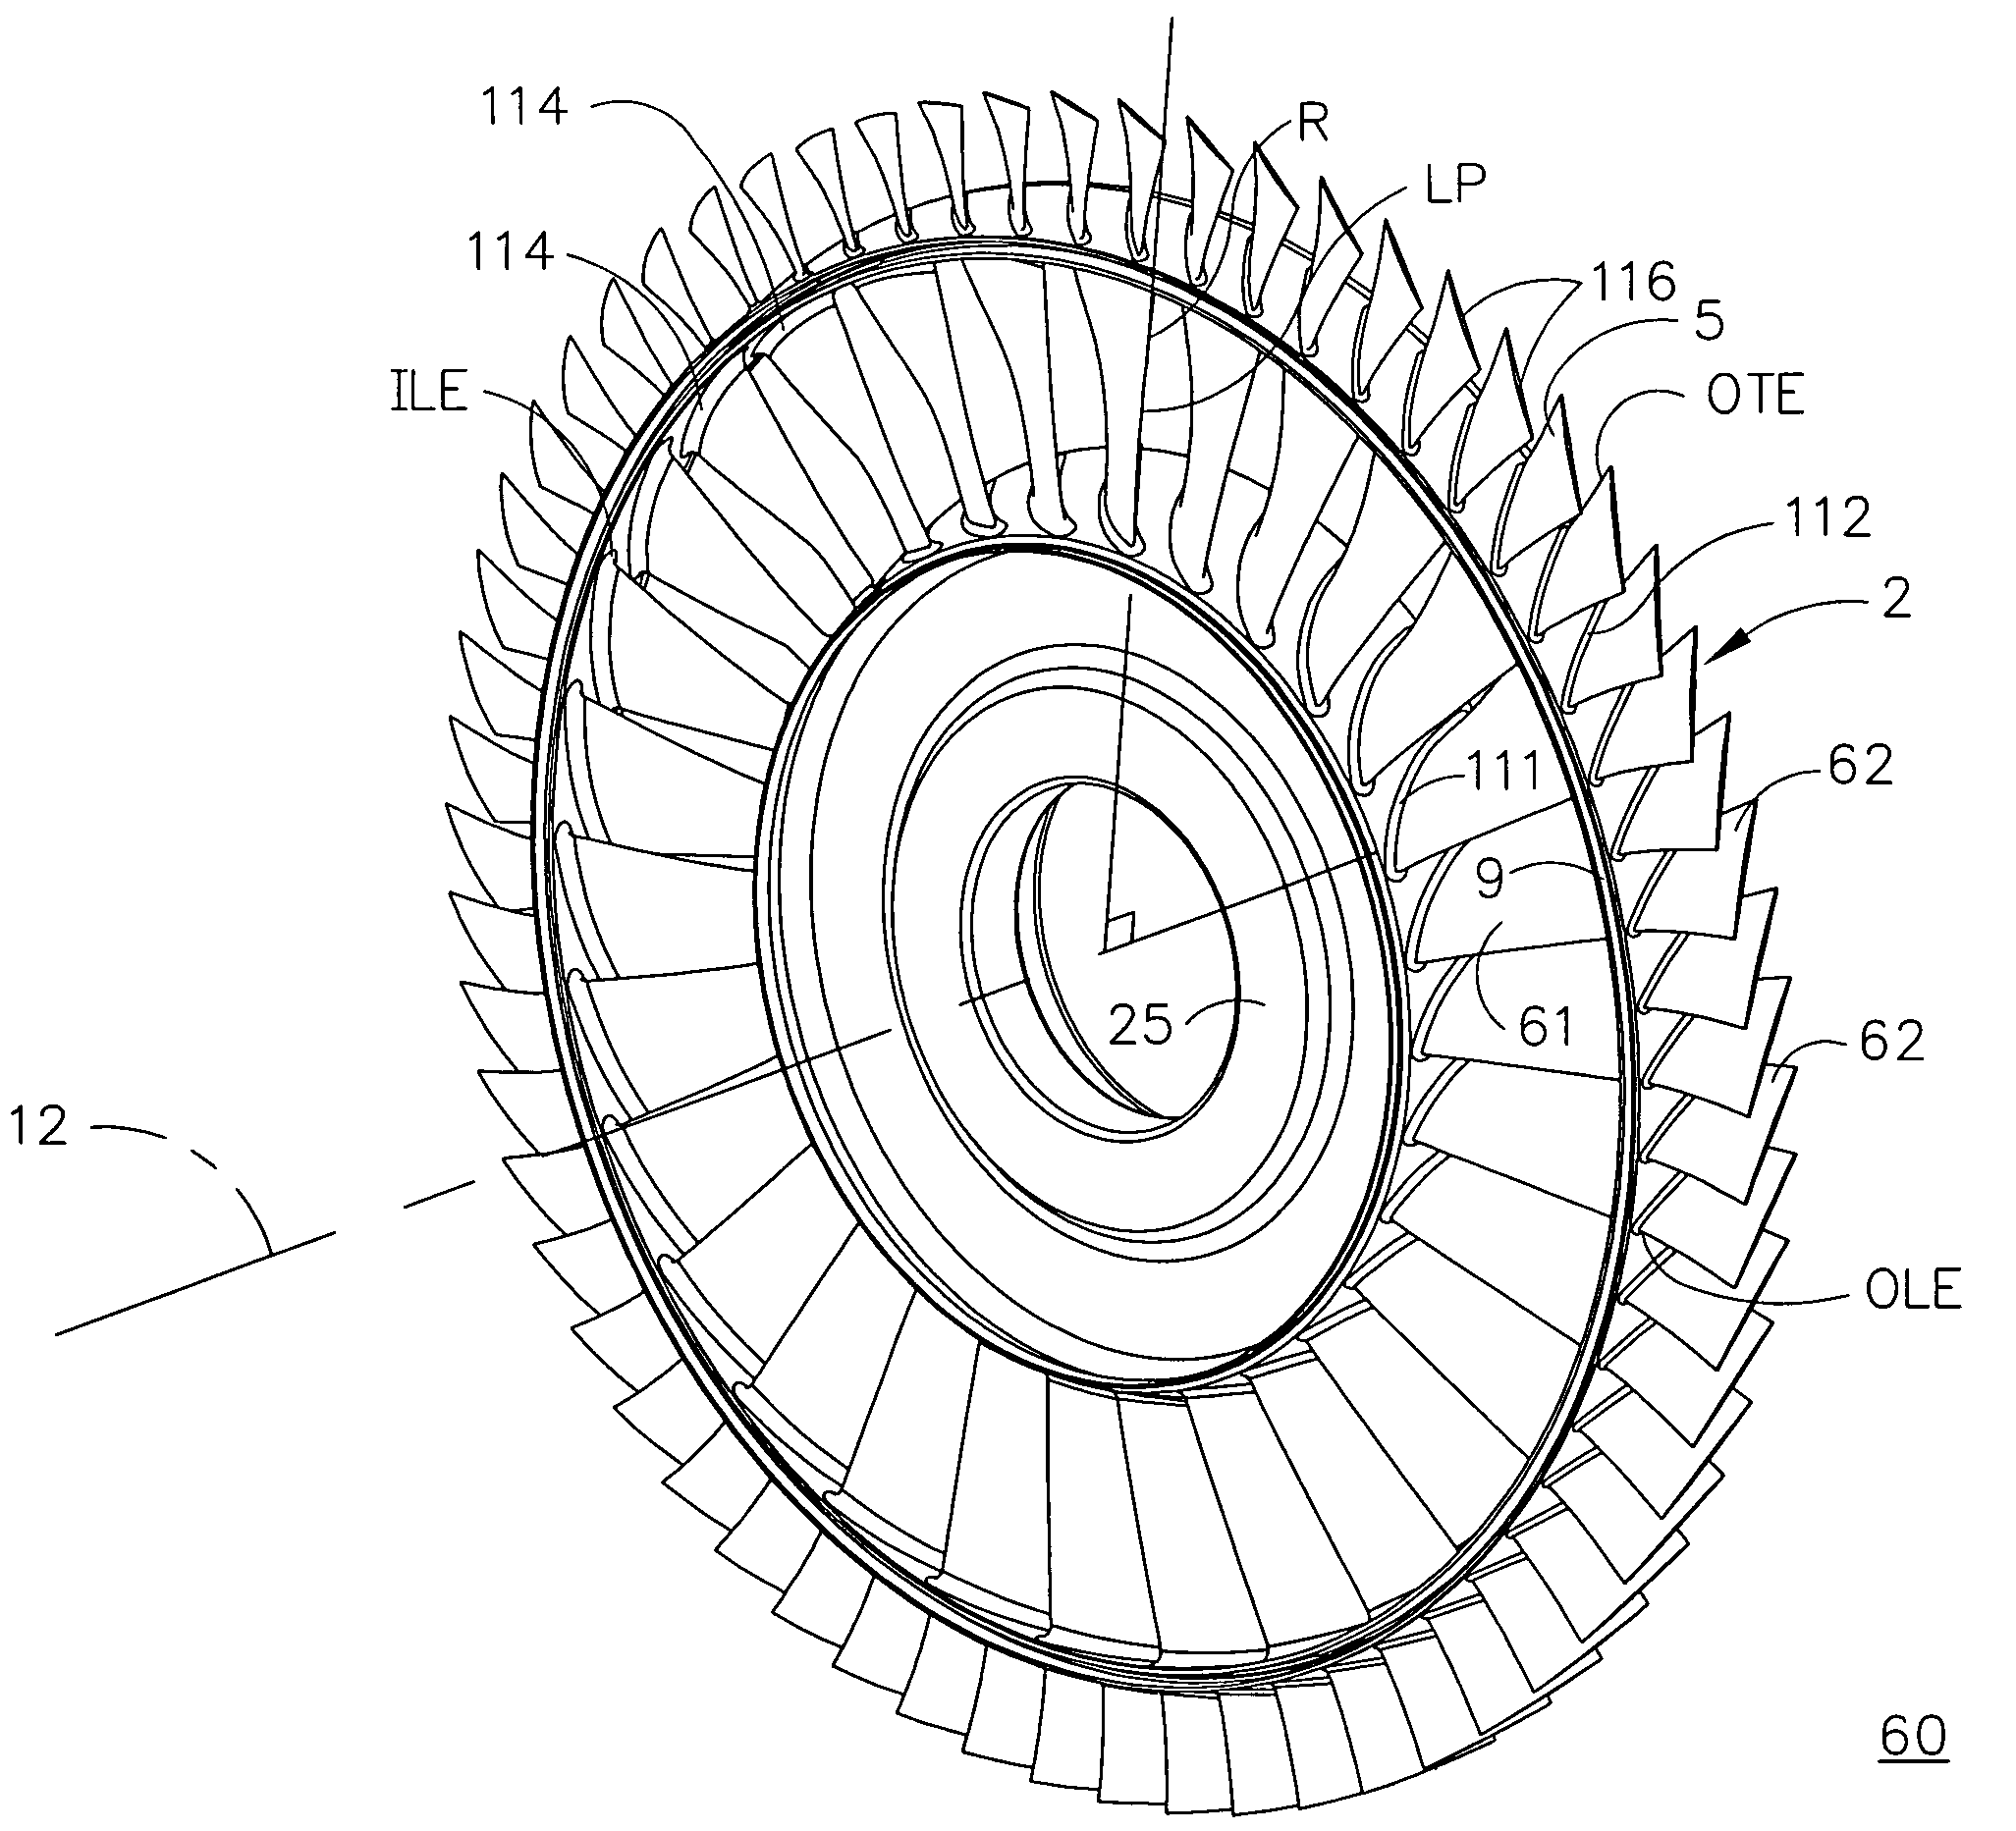 FLADE fan with different inner and outer airfoil stagger angles at a shroud therebetween